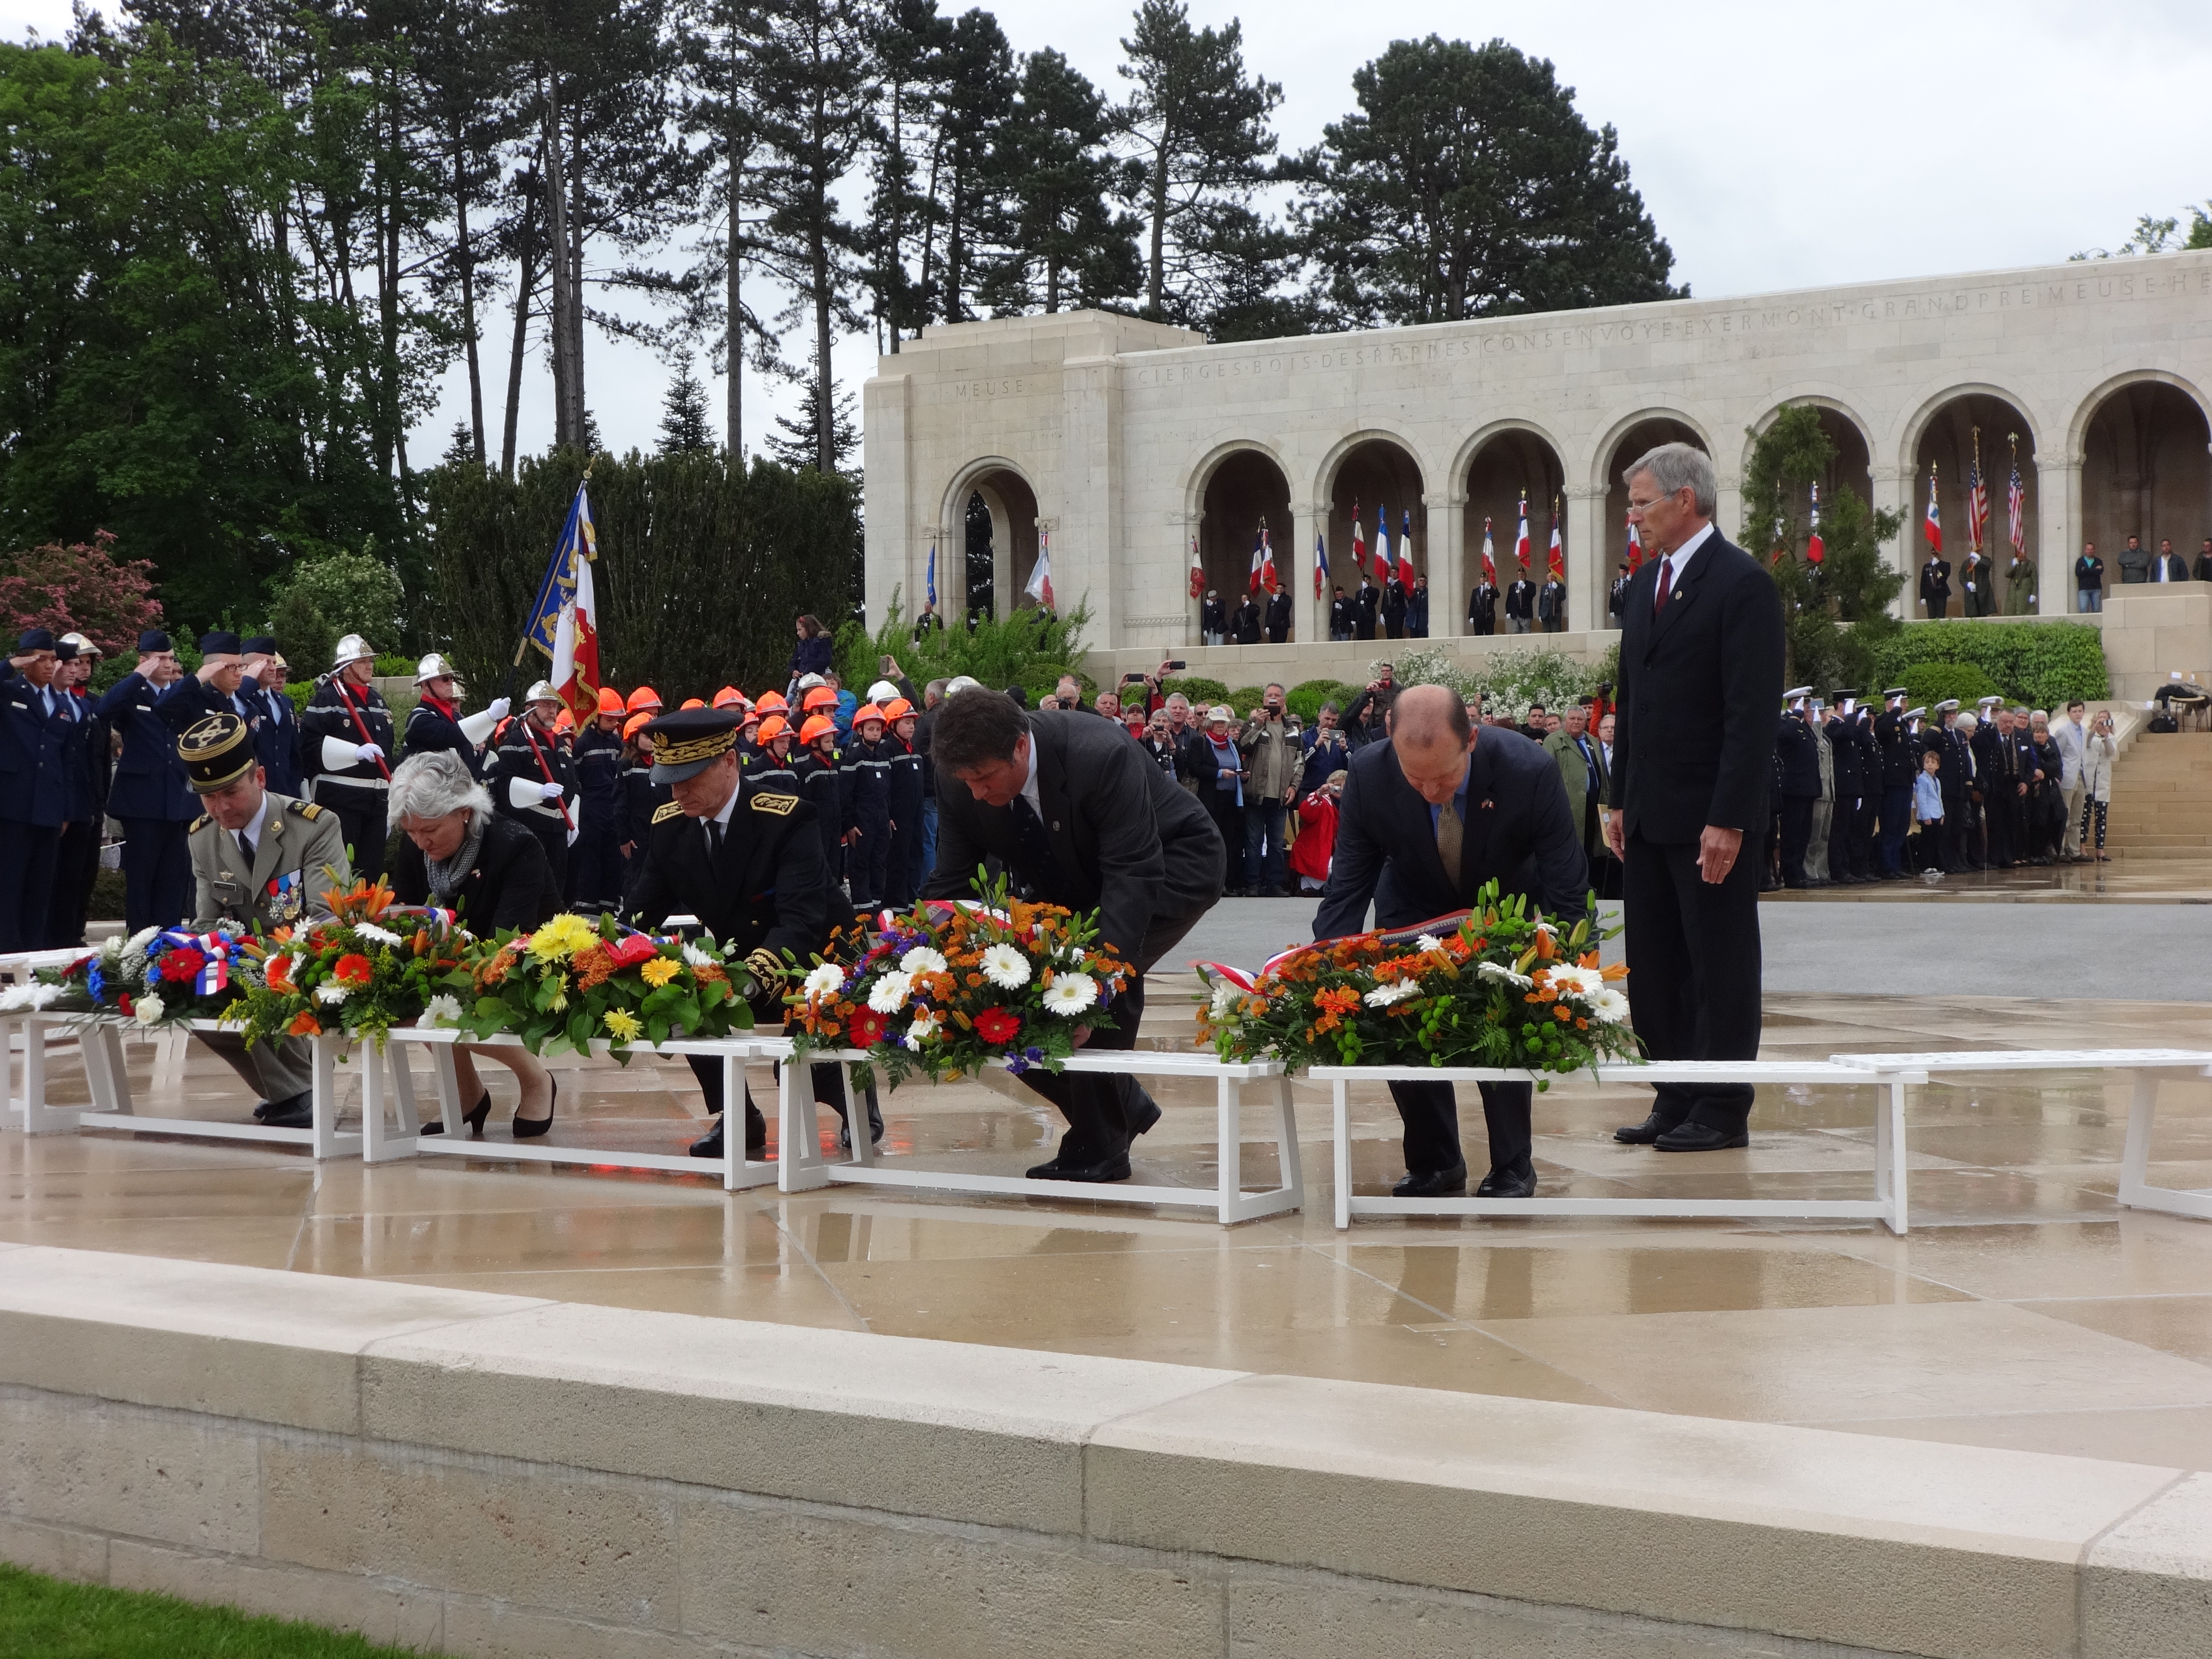 Members of the official party lay floral wreaths during the ceremony. 